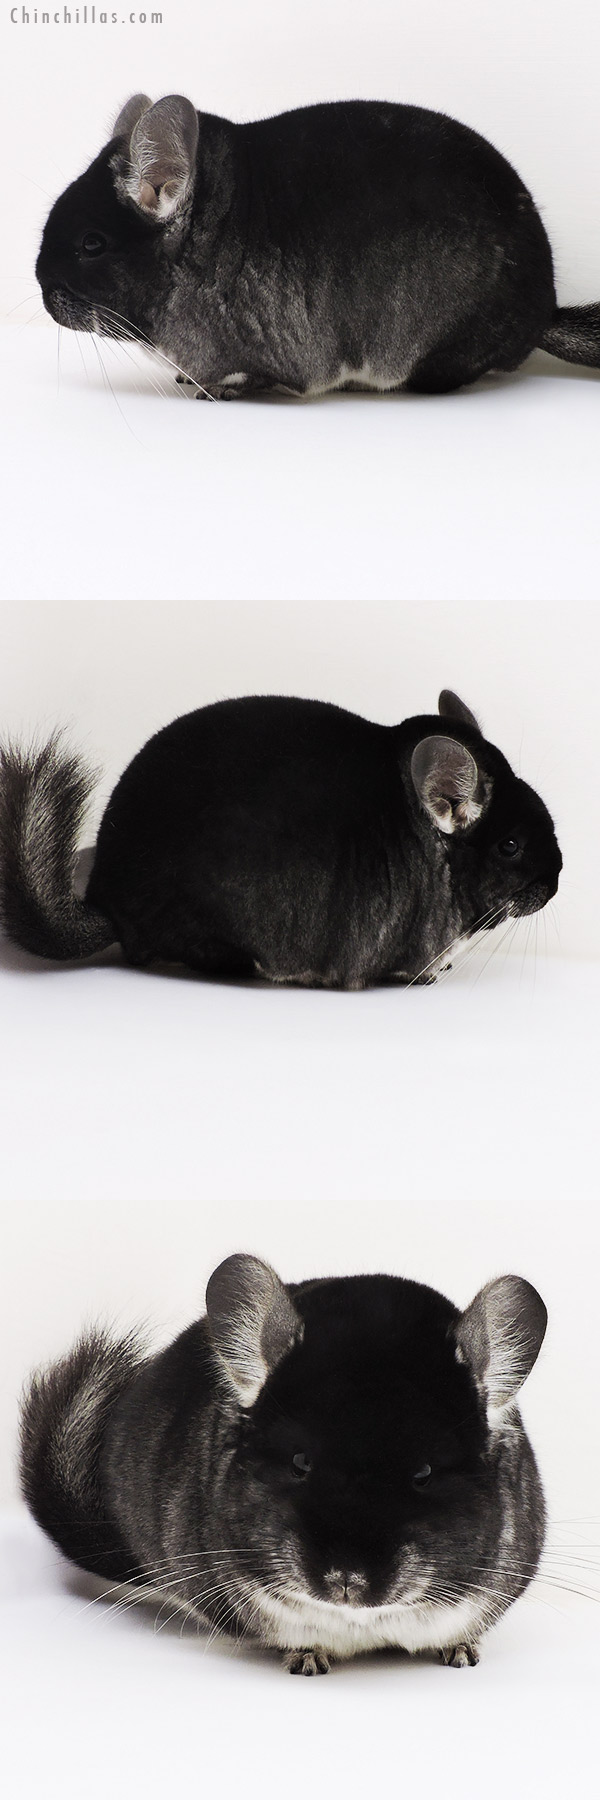 Chinchilla or related item offered for sale or export on Chinchillas.com - 17144 Large Blocky Brevi Type Herd Improvement Quality Black Velvet Male Chinchilla